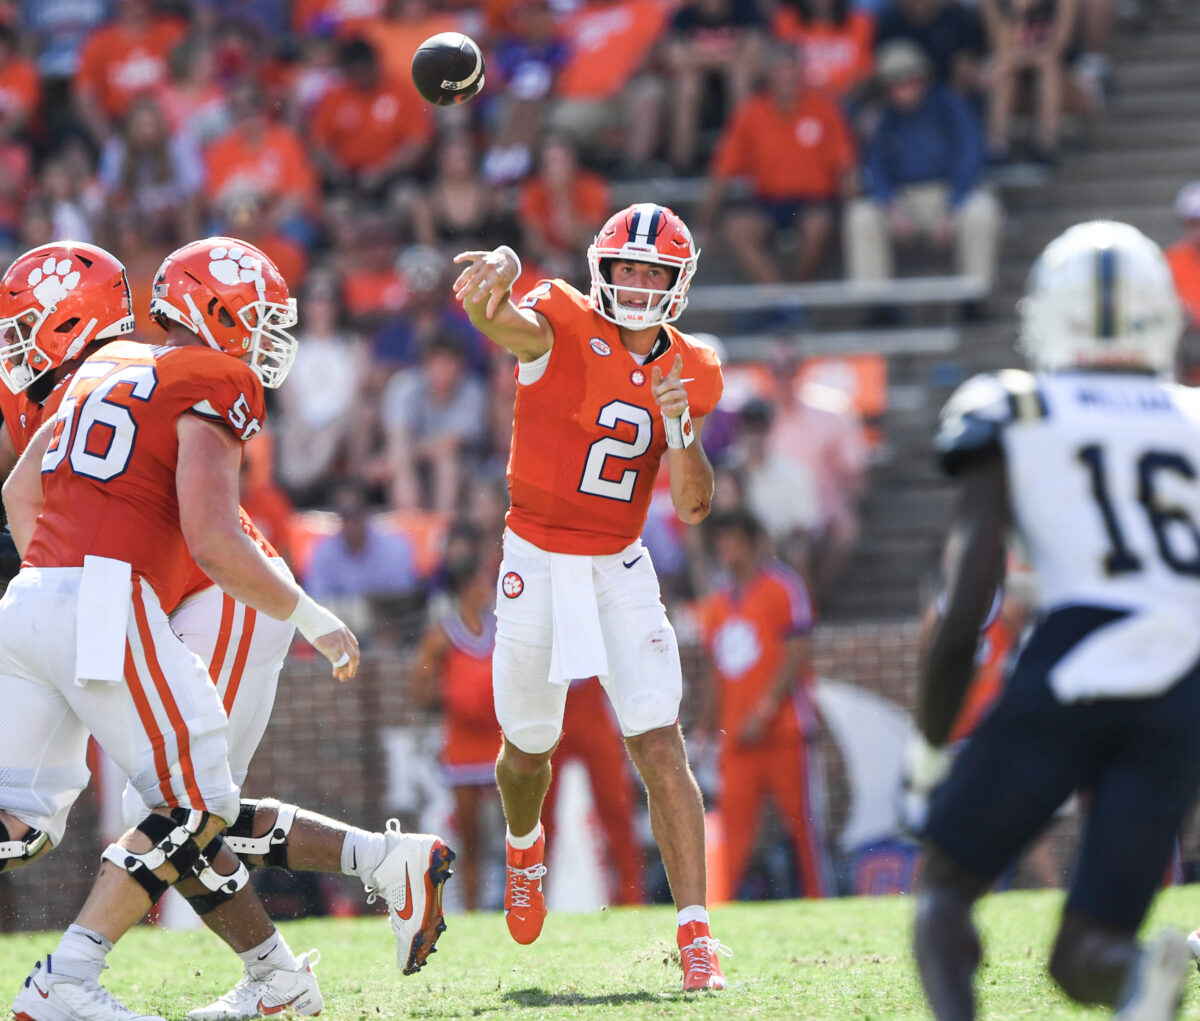 Kicker Jonathan Weitz’s first career field goal gives Clemson a 3-0 lead over Florida State